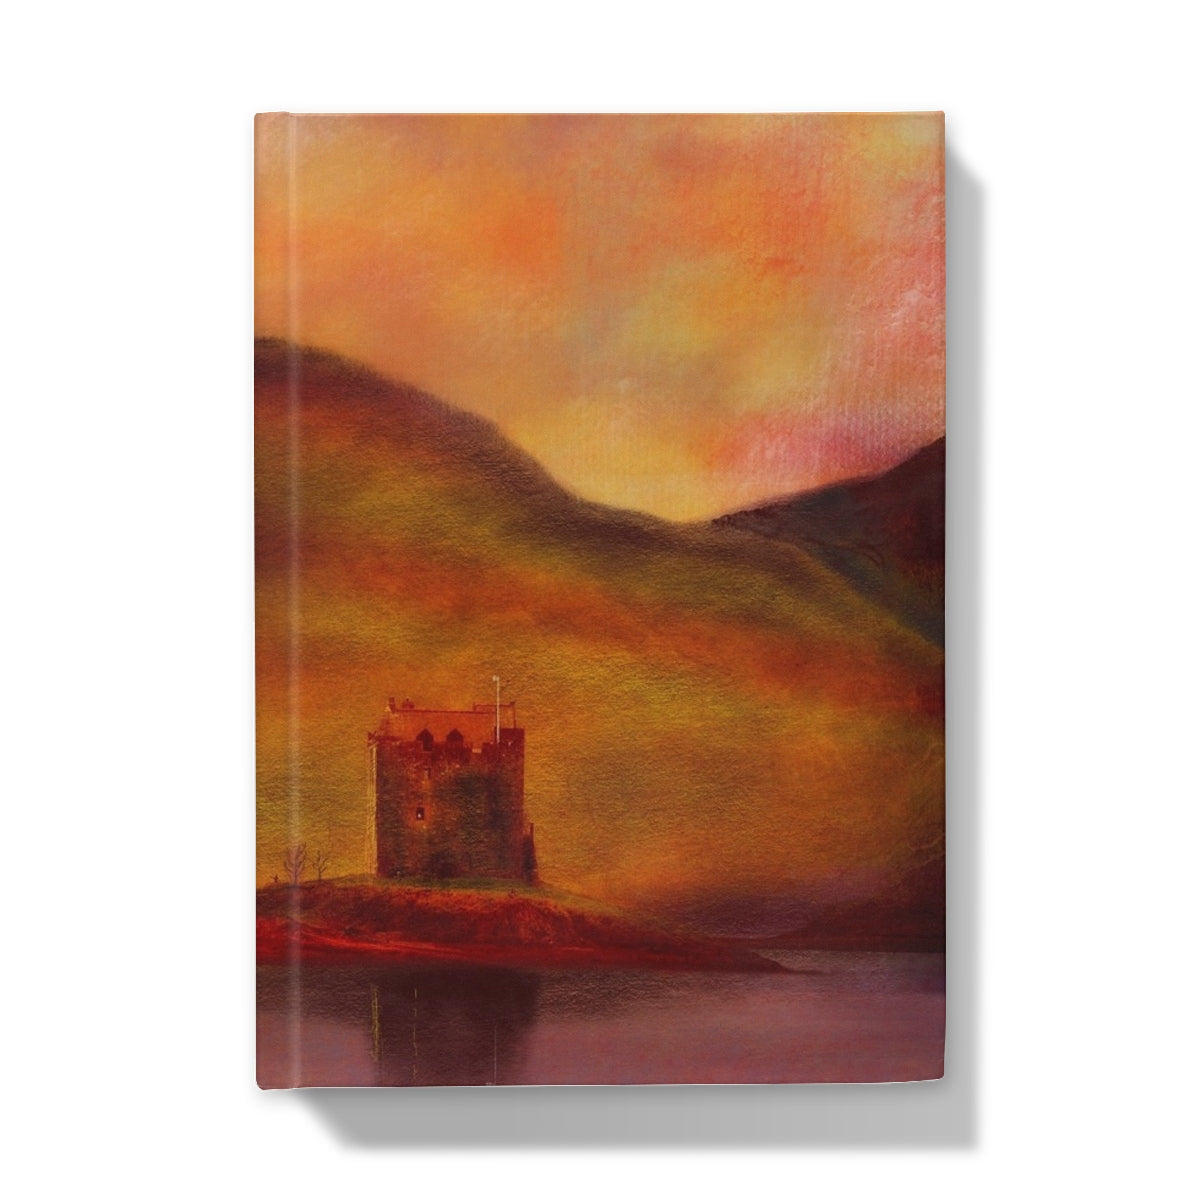 Castle Stalker Sunset Art Gifts Hardback Journal-Journals & Notebooks-Historic & Iconic Scotland Art Gallery-A4-Plain-Paintings, Prints, Homeware, Art Gifts From Scotland By Scottish Artist Kevin Hunter